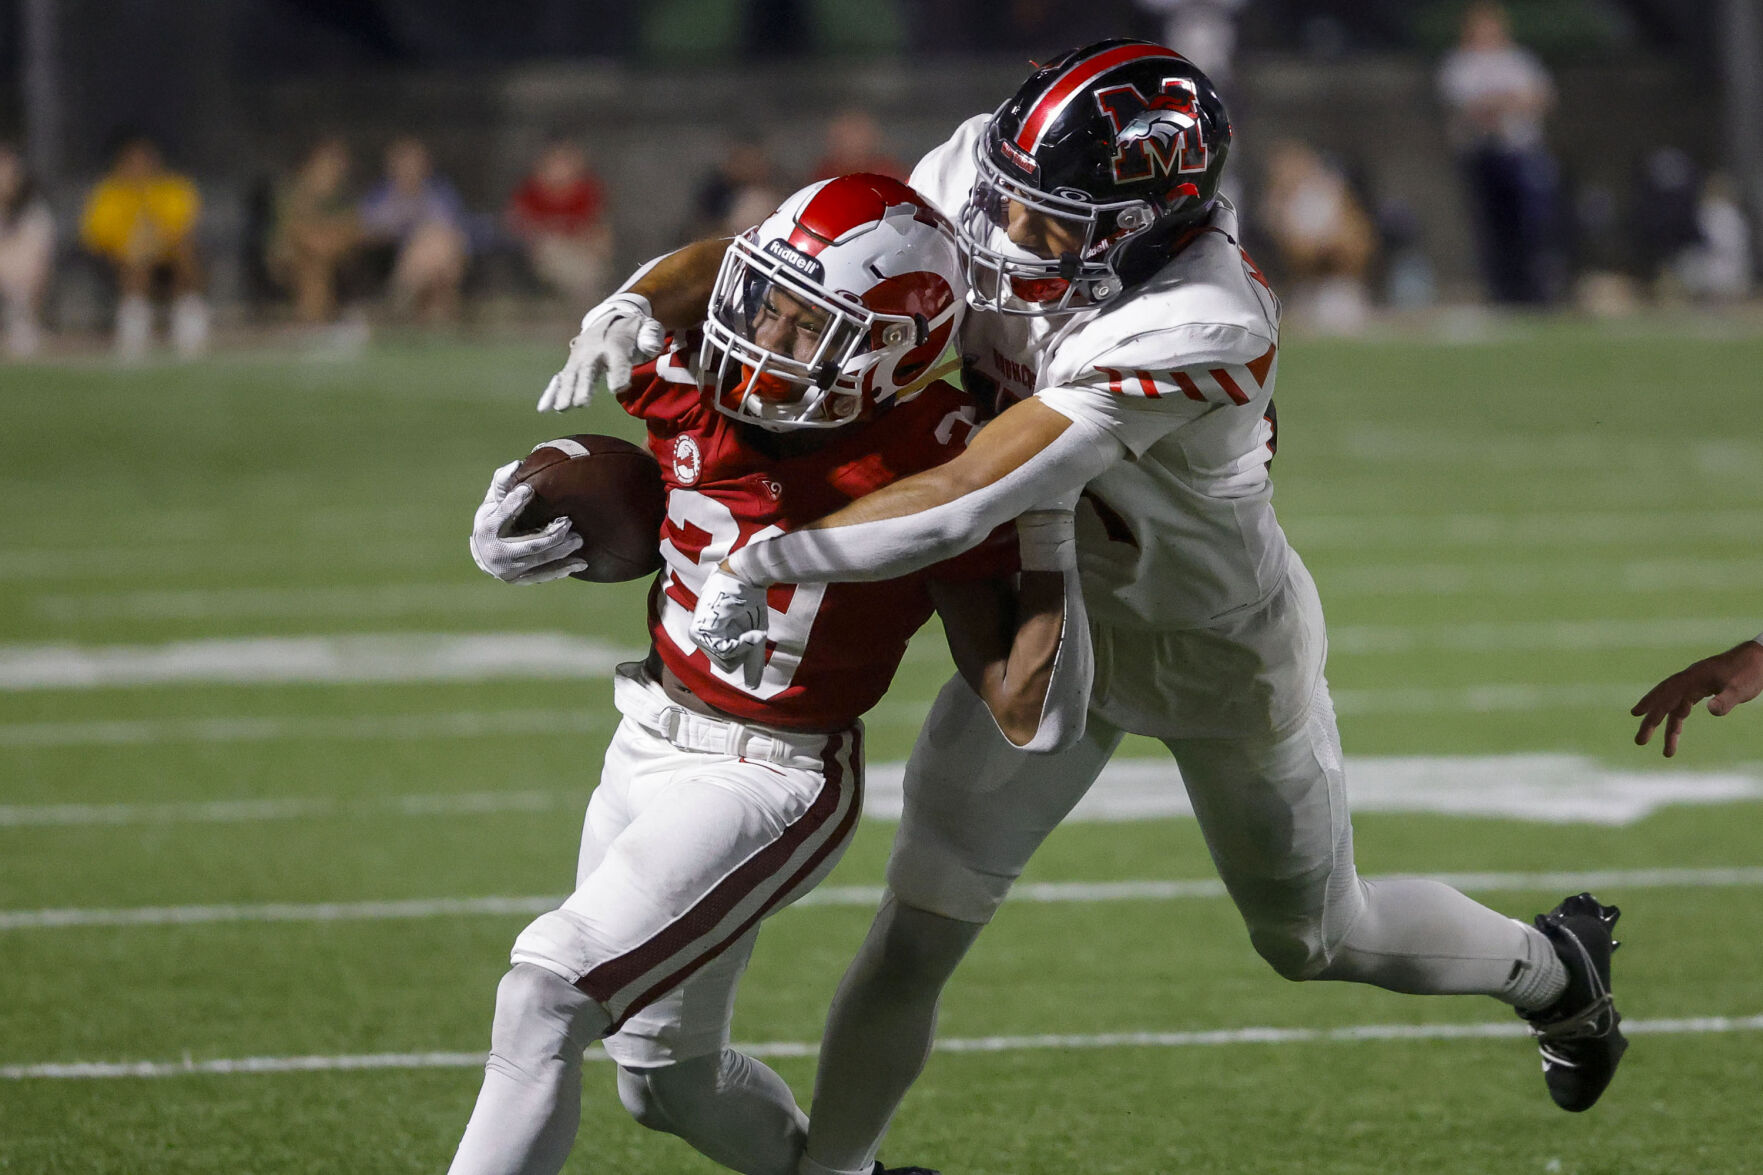 Domination and upsets | Another eventful week of high school football